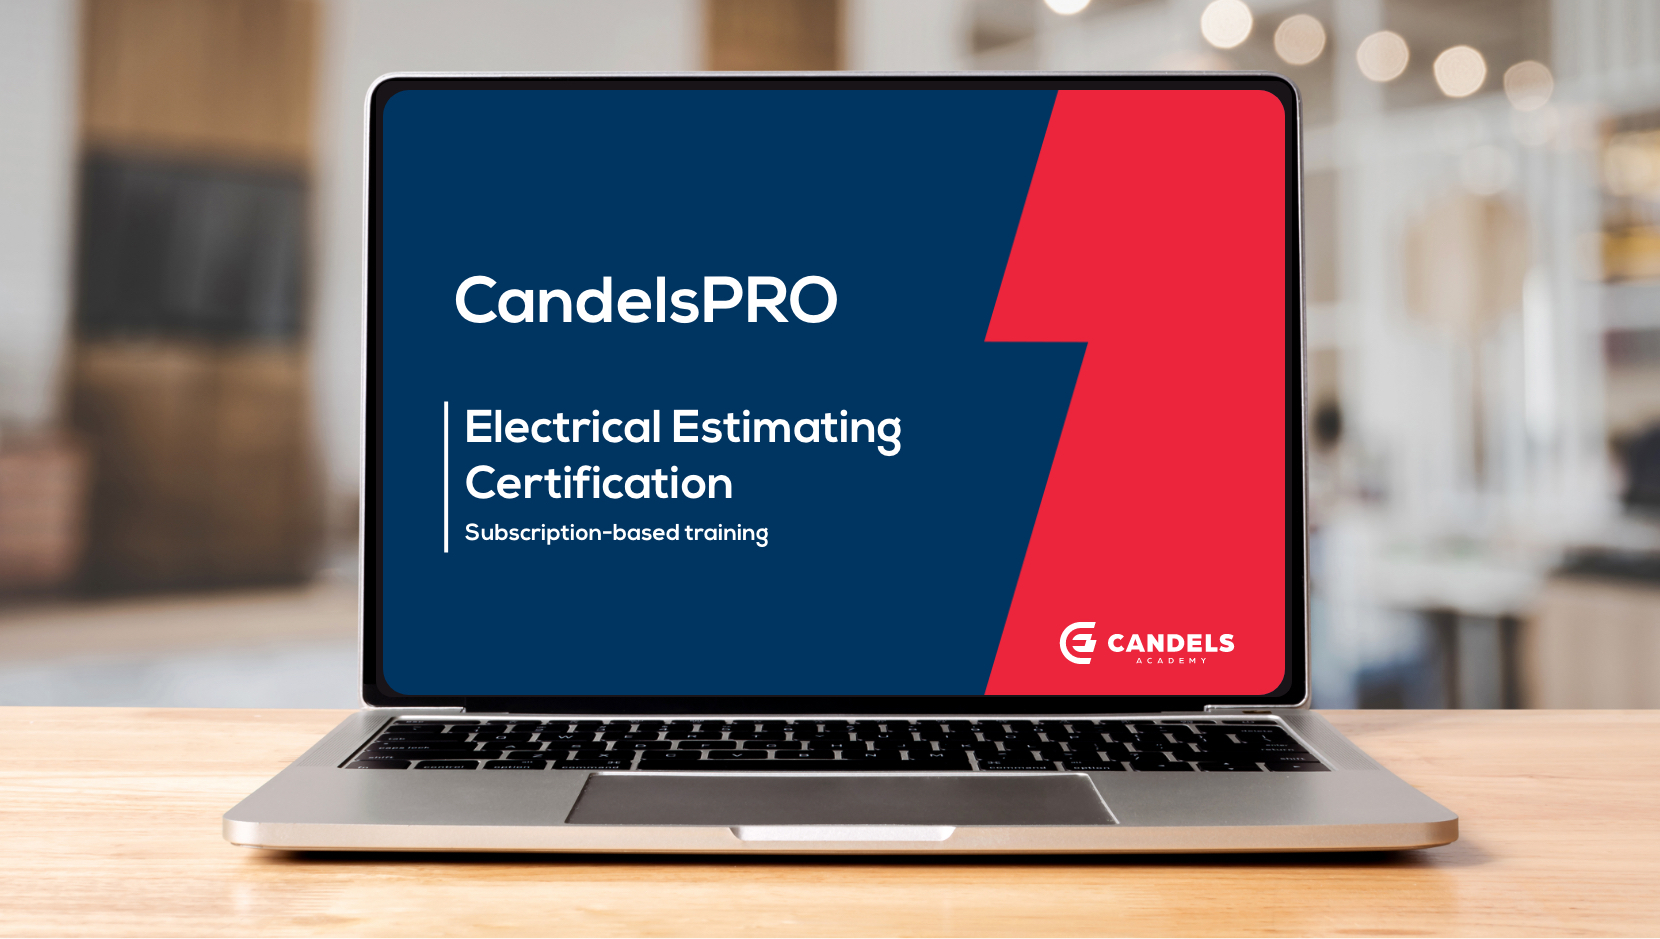 Candels Estimating launches CandelsPRO™